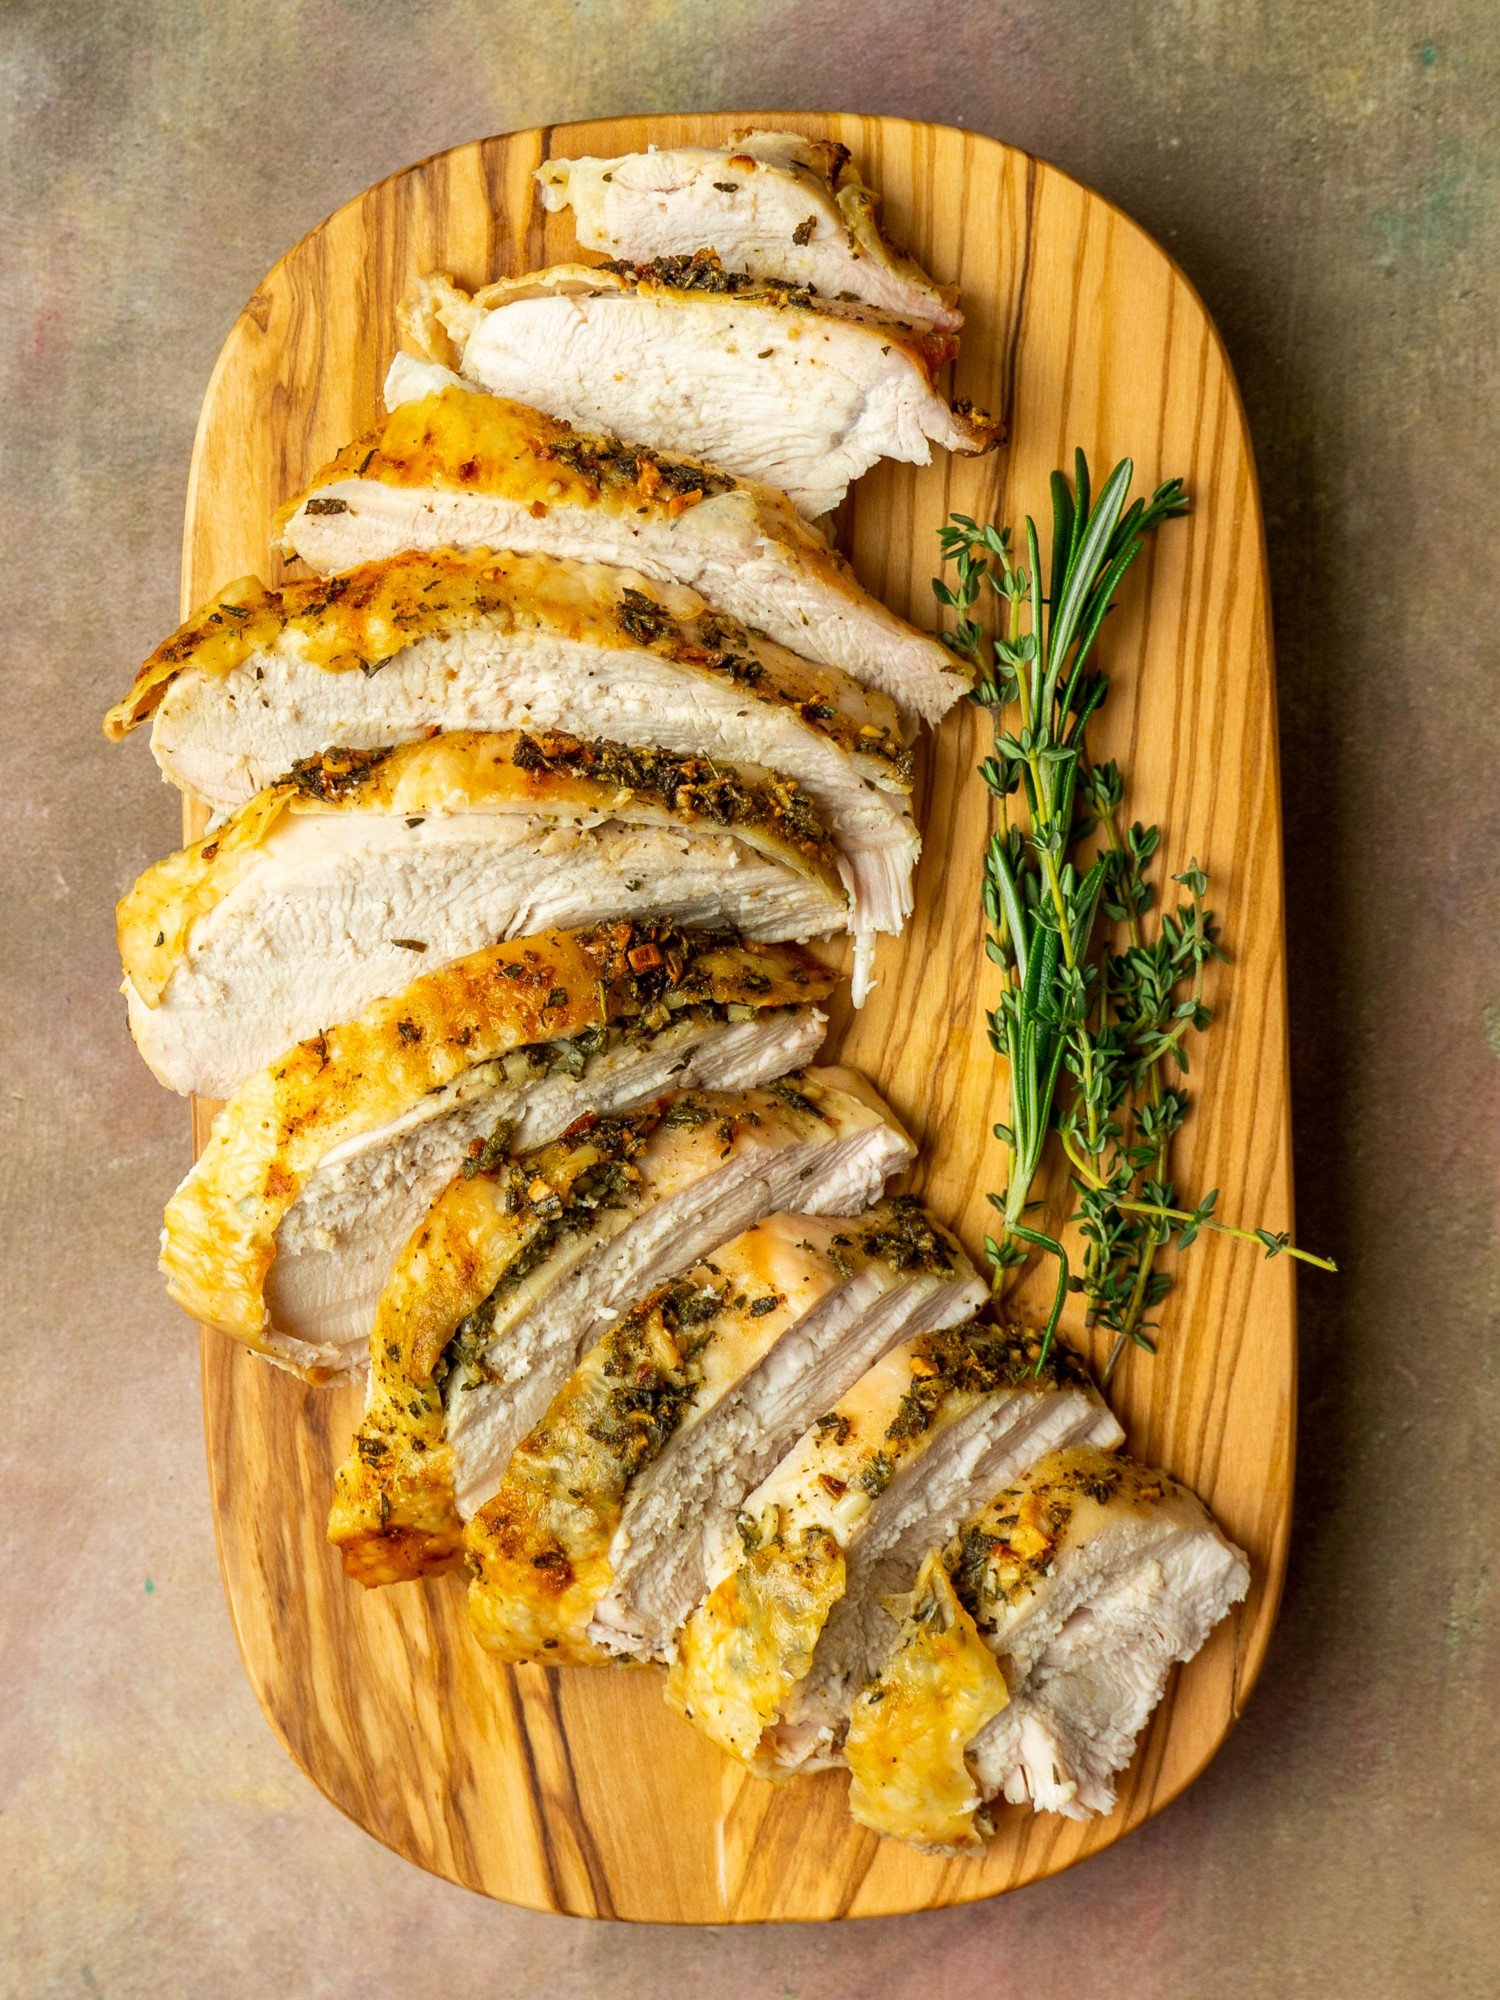 https://madaboutfood.co/wp-content/uploads/2021/10/How-to-Roast-a-Turkey-Breast-07.jpg